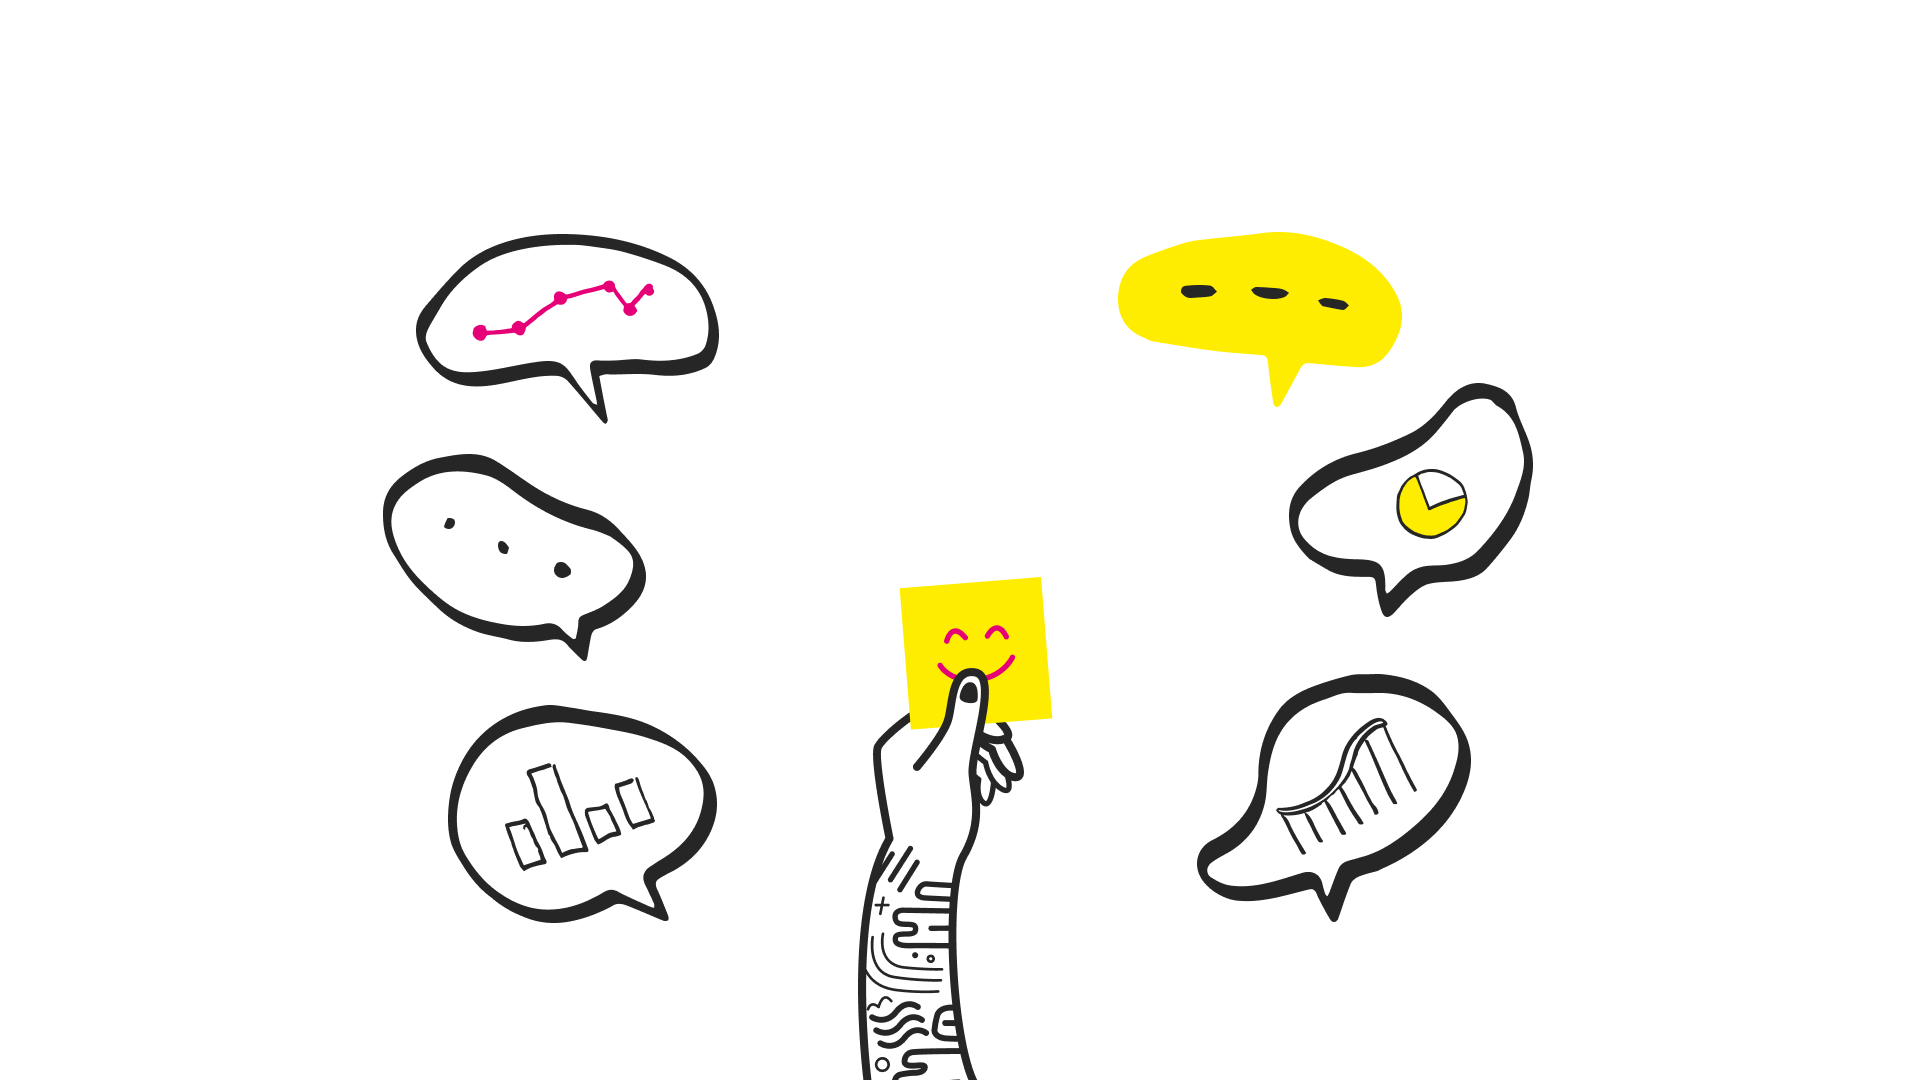 Sketch of a hand in the air holding a yellow sticky note, and lots of speech bubbles in the background